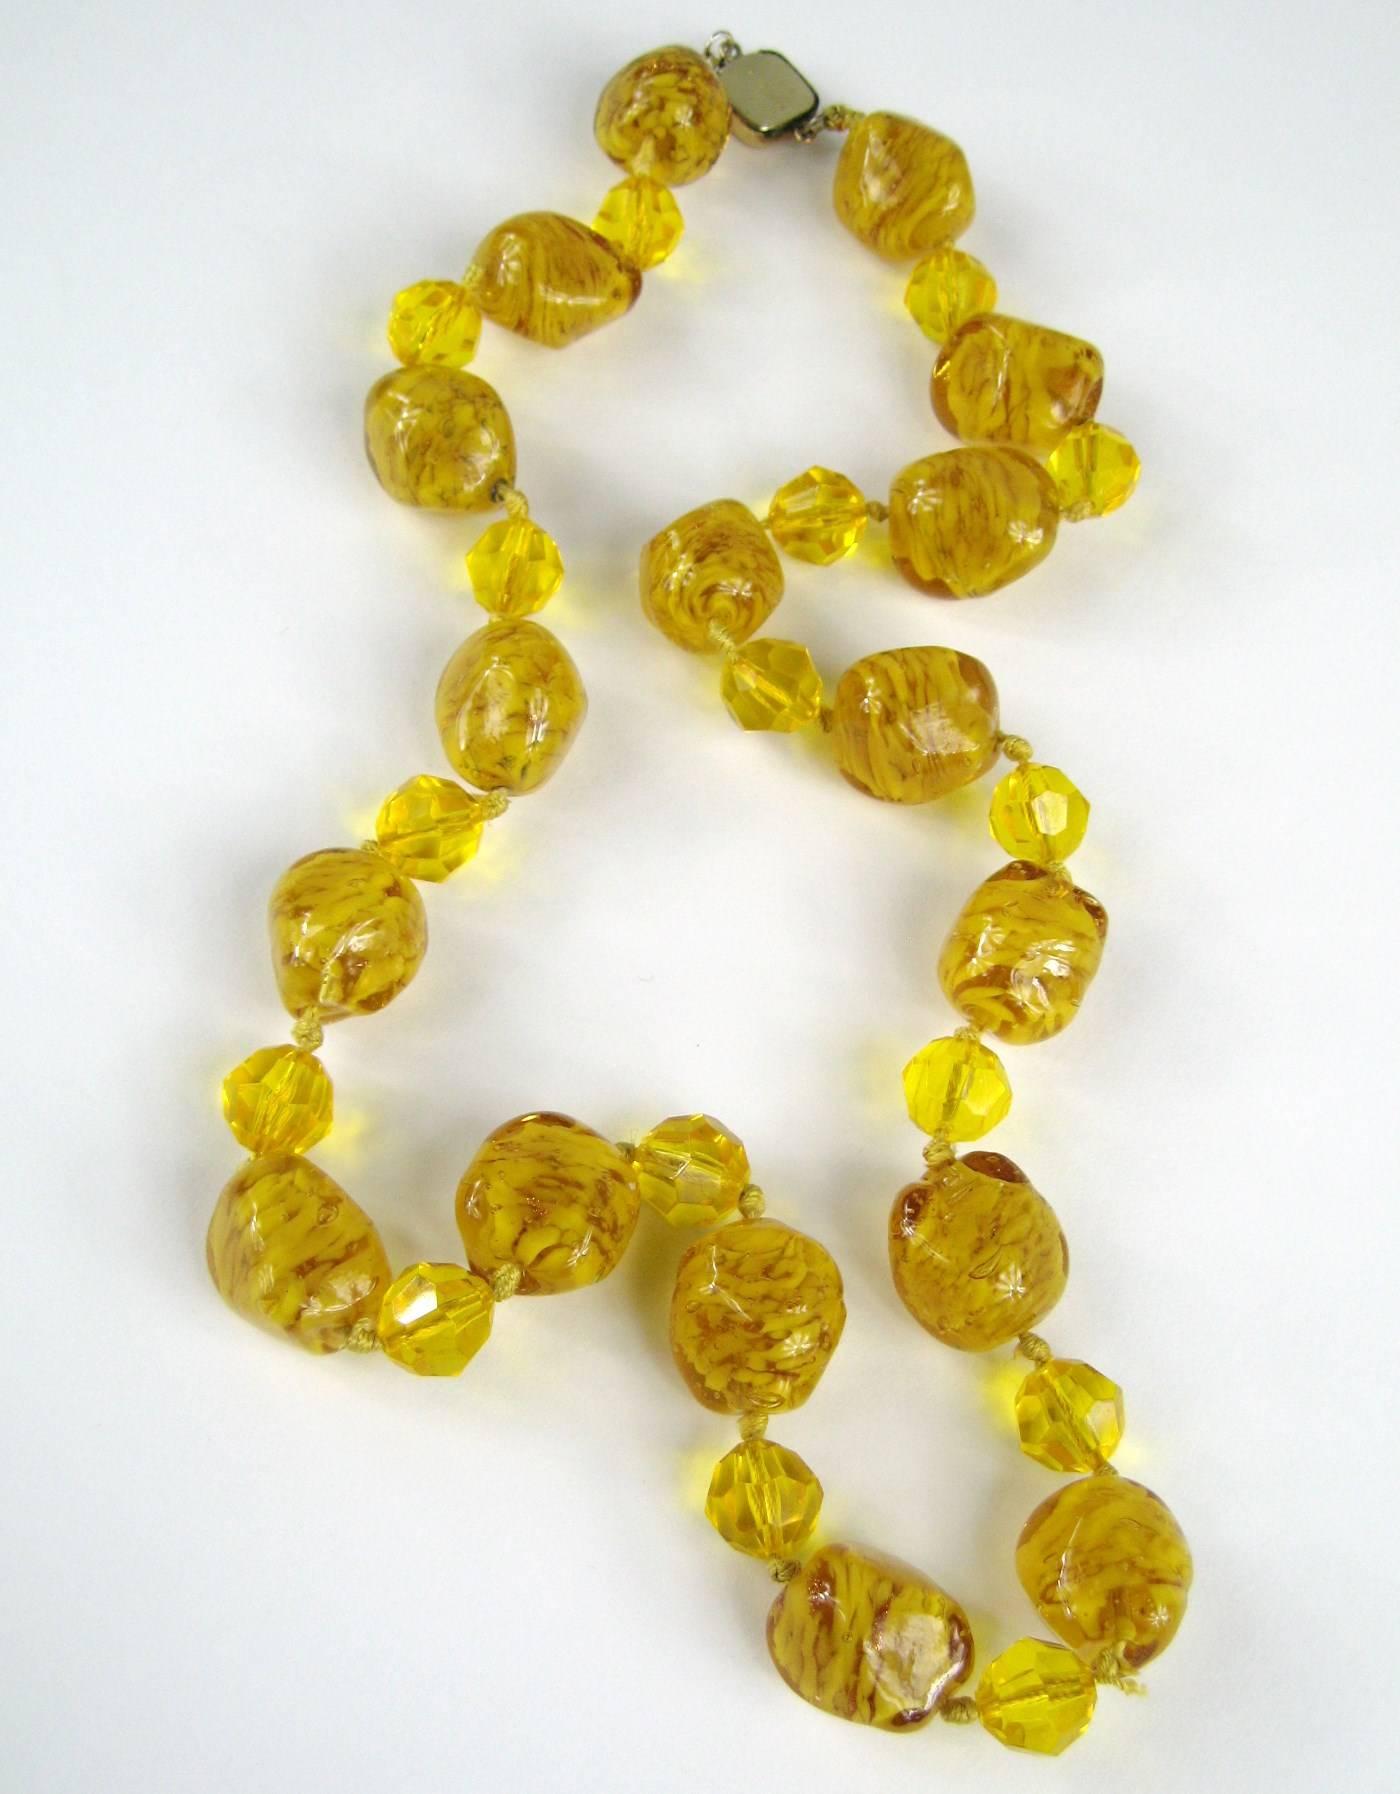 A Stunning Venetian Gold Foiled Glass Bead Necklace. This necklace will be noticed, it has Huge Venetian Glass beads, all hand knotted. Large beads make up this wonderful necklace in two different sizes, the smaller beads are faceted. Clasp marked